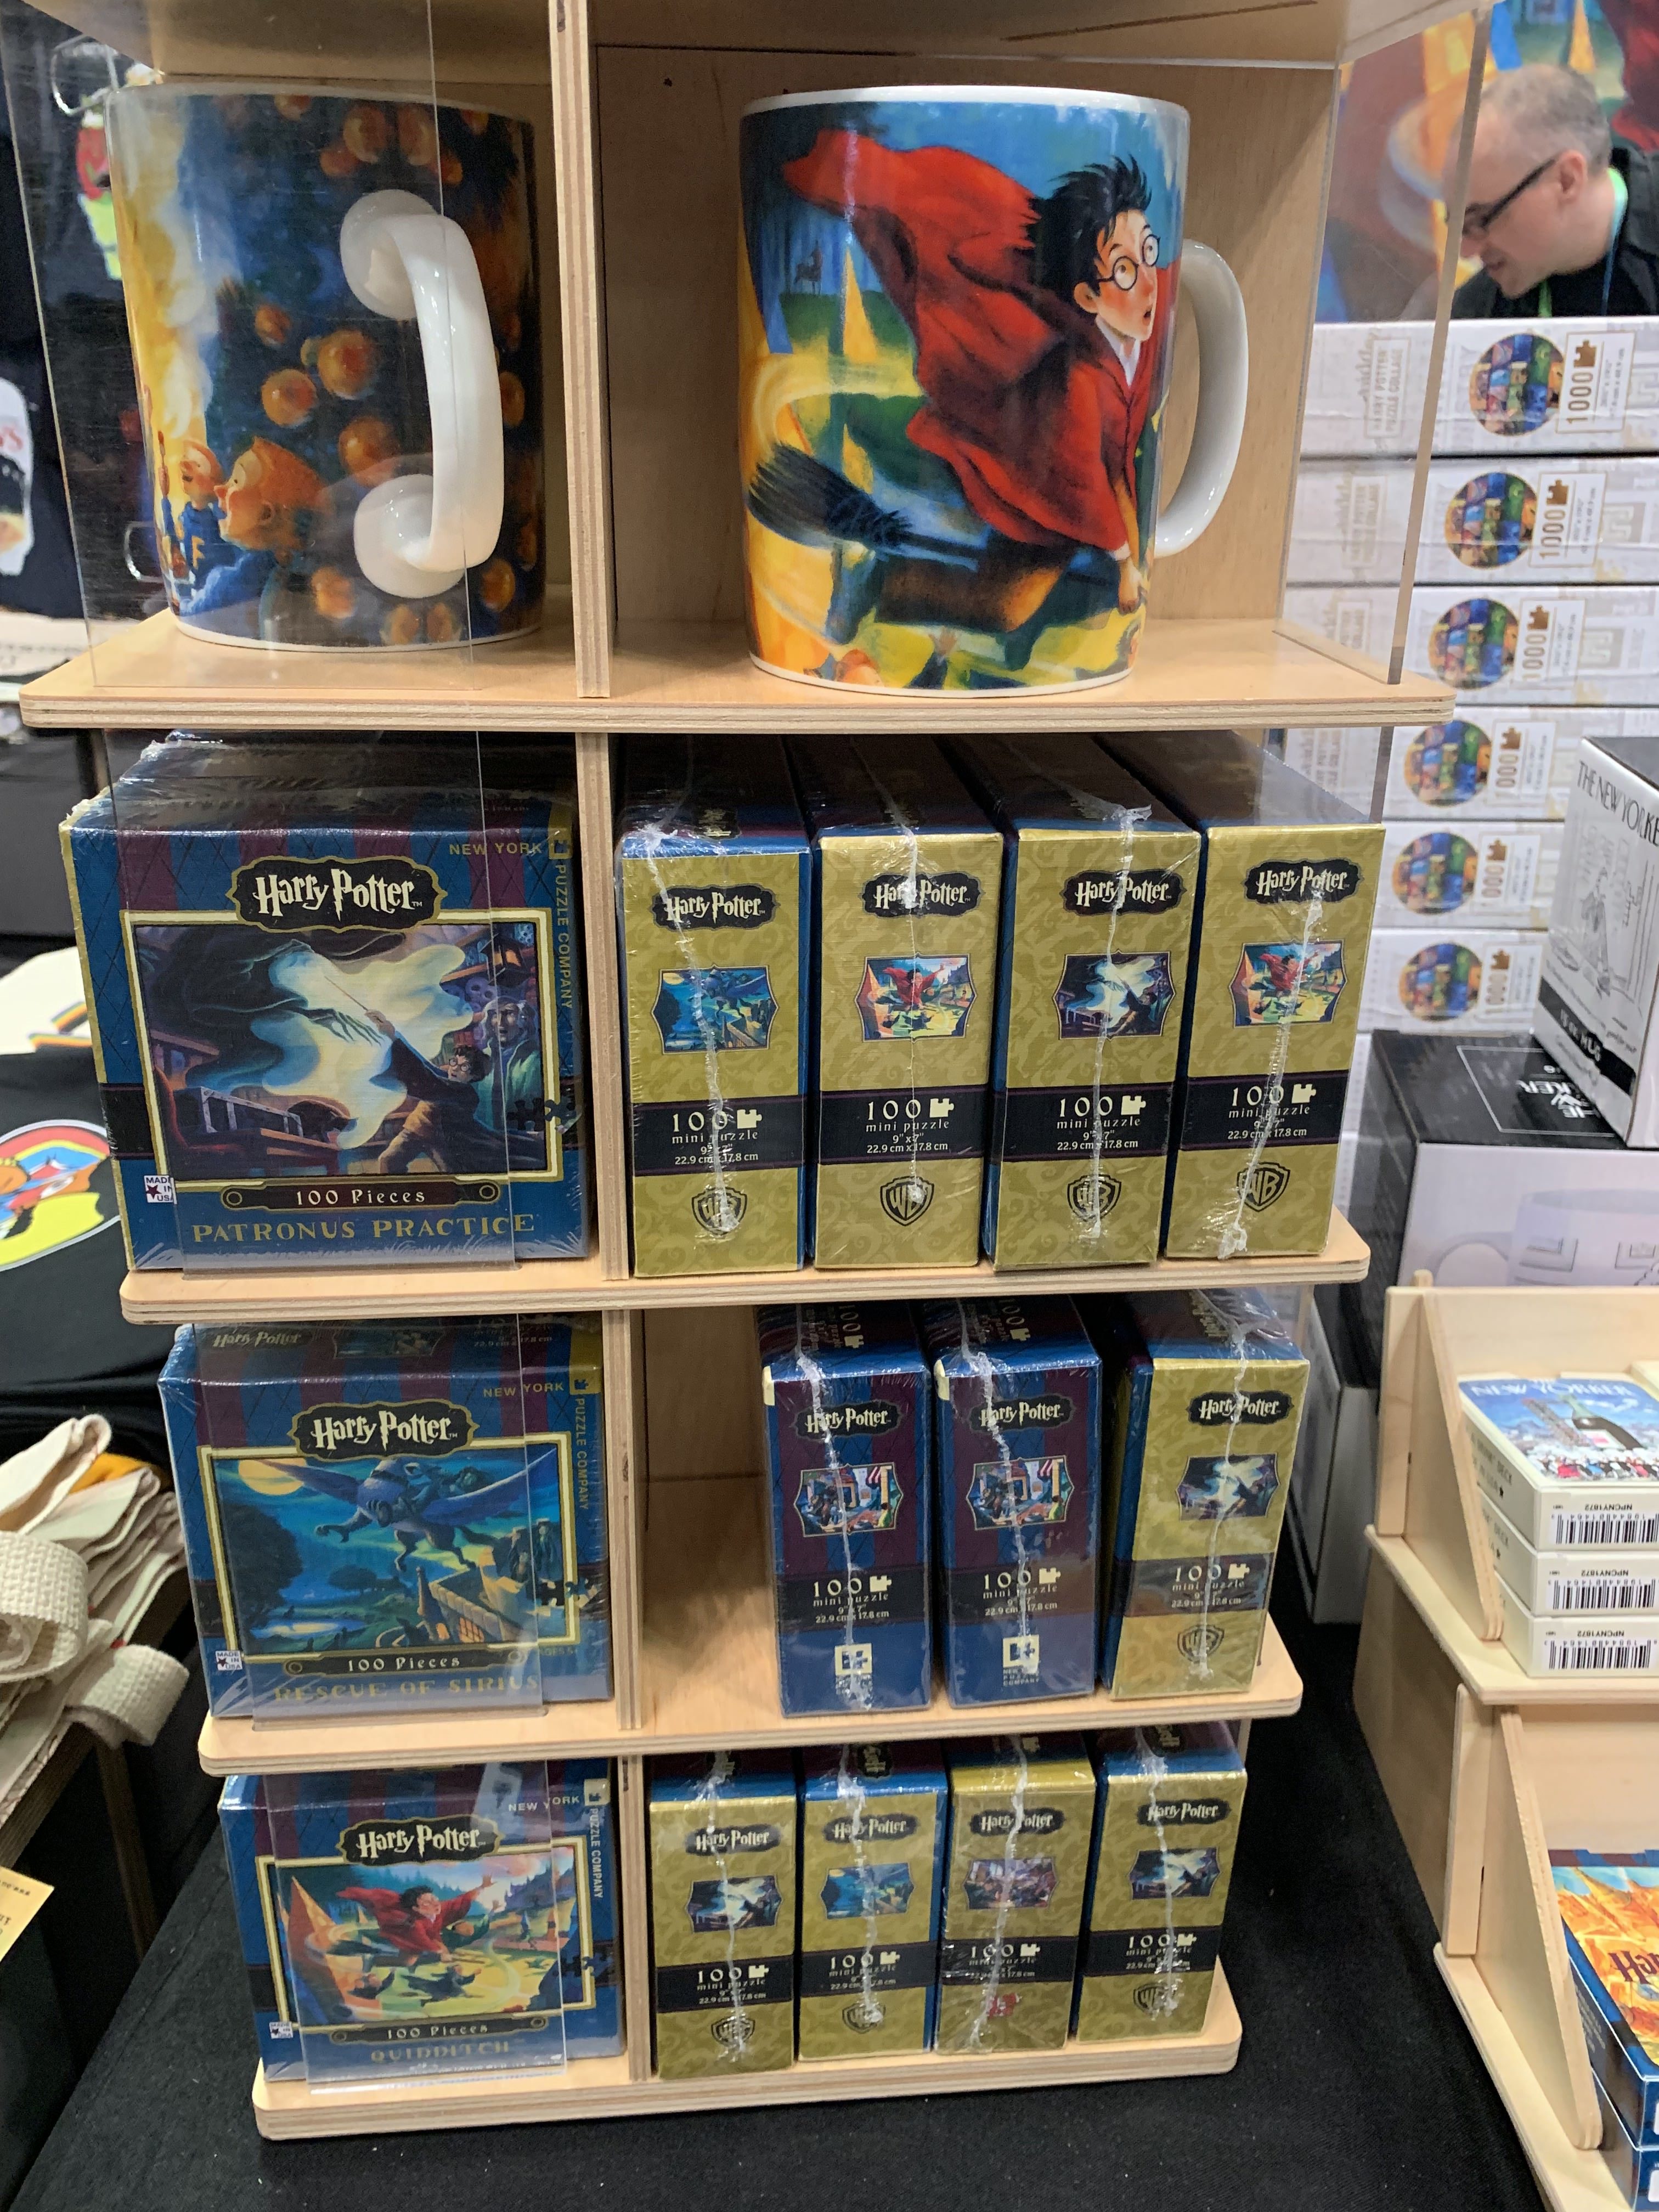 You can also find mini puzzles at the New York Puzzle Company booth, perfect for young children.